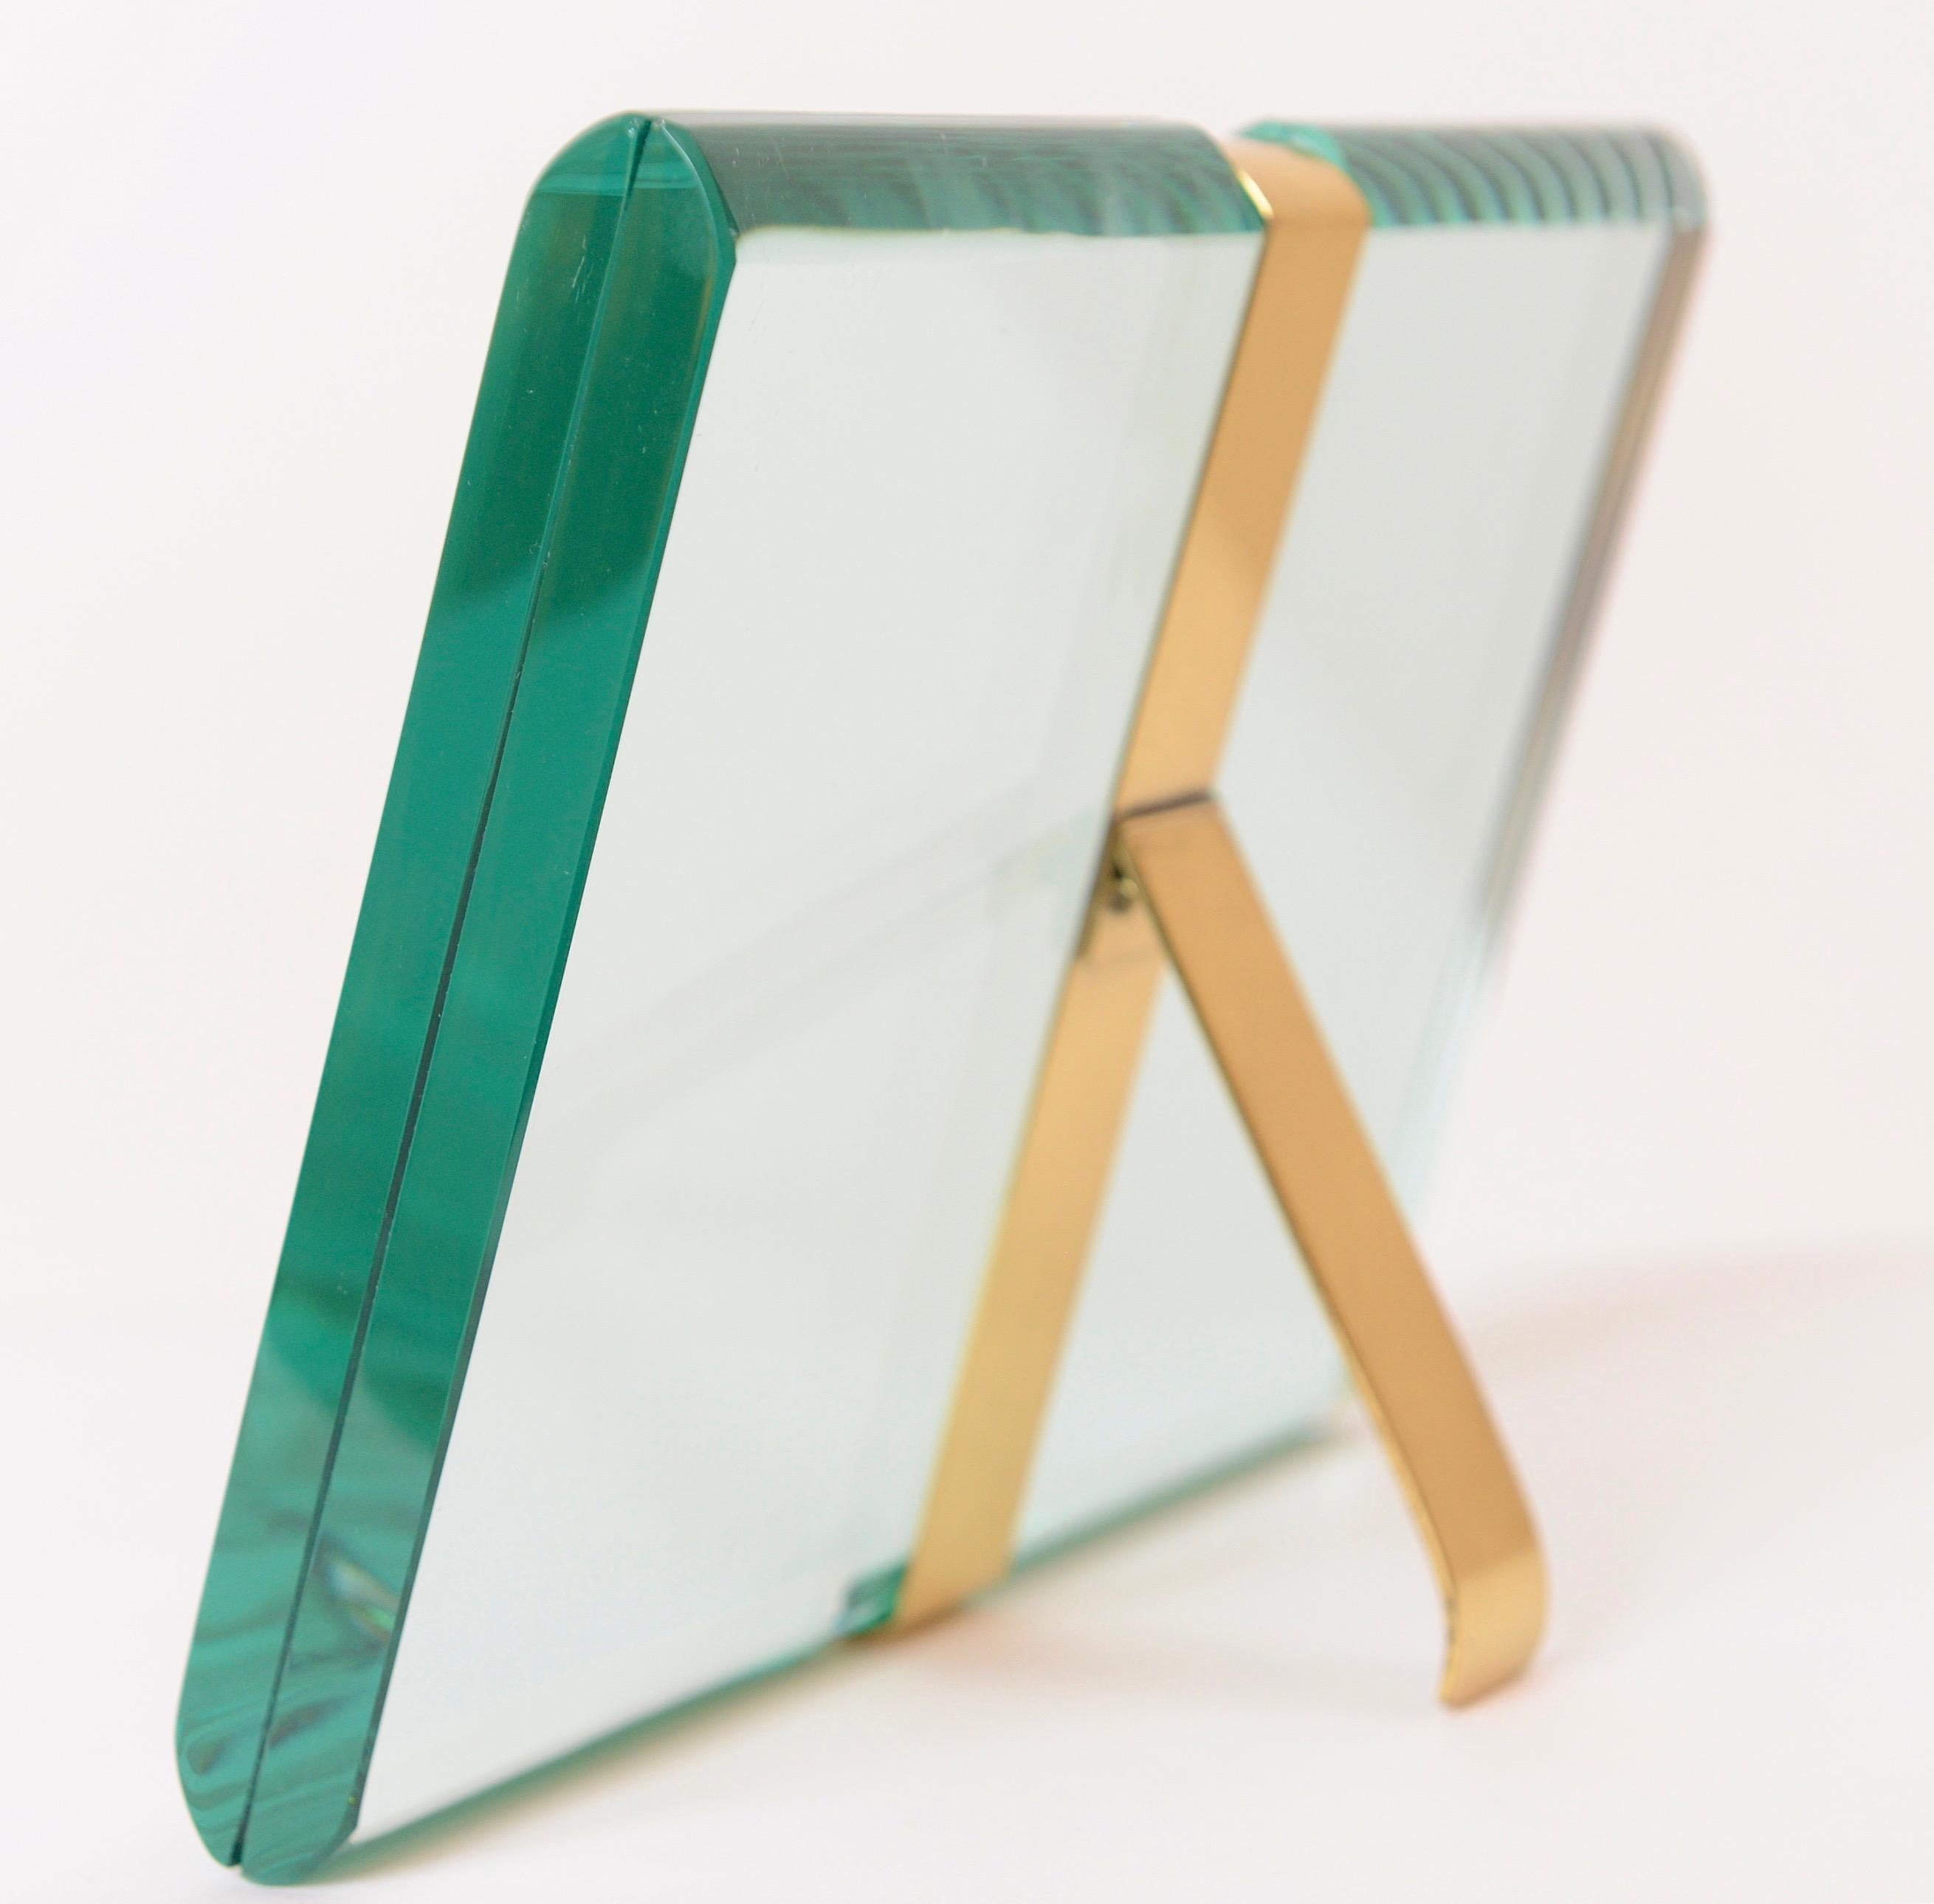 An exquisite St Gobain crystal picture frame designed and produced by the Milanese company, Fontana Arte, in 1955. The slender brass fitting and back support couples the two pieces of beveled glass enabling the user to place a photograph between